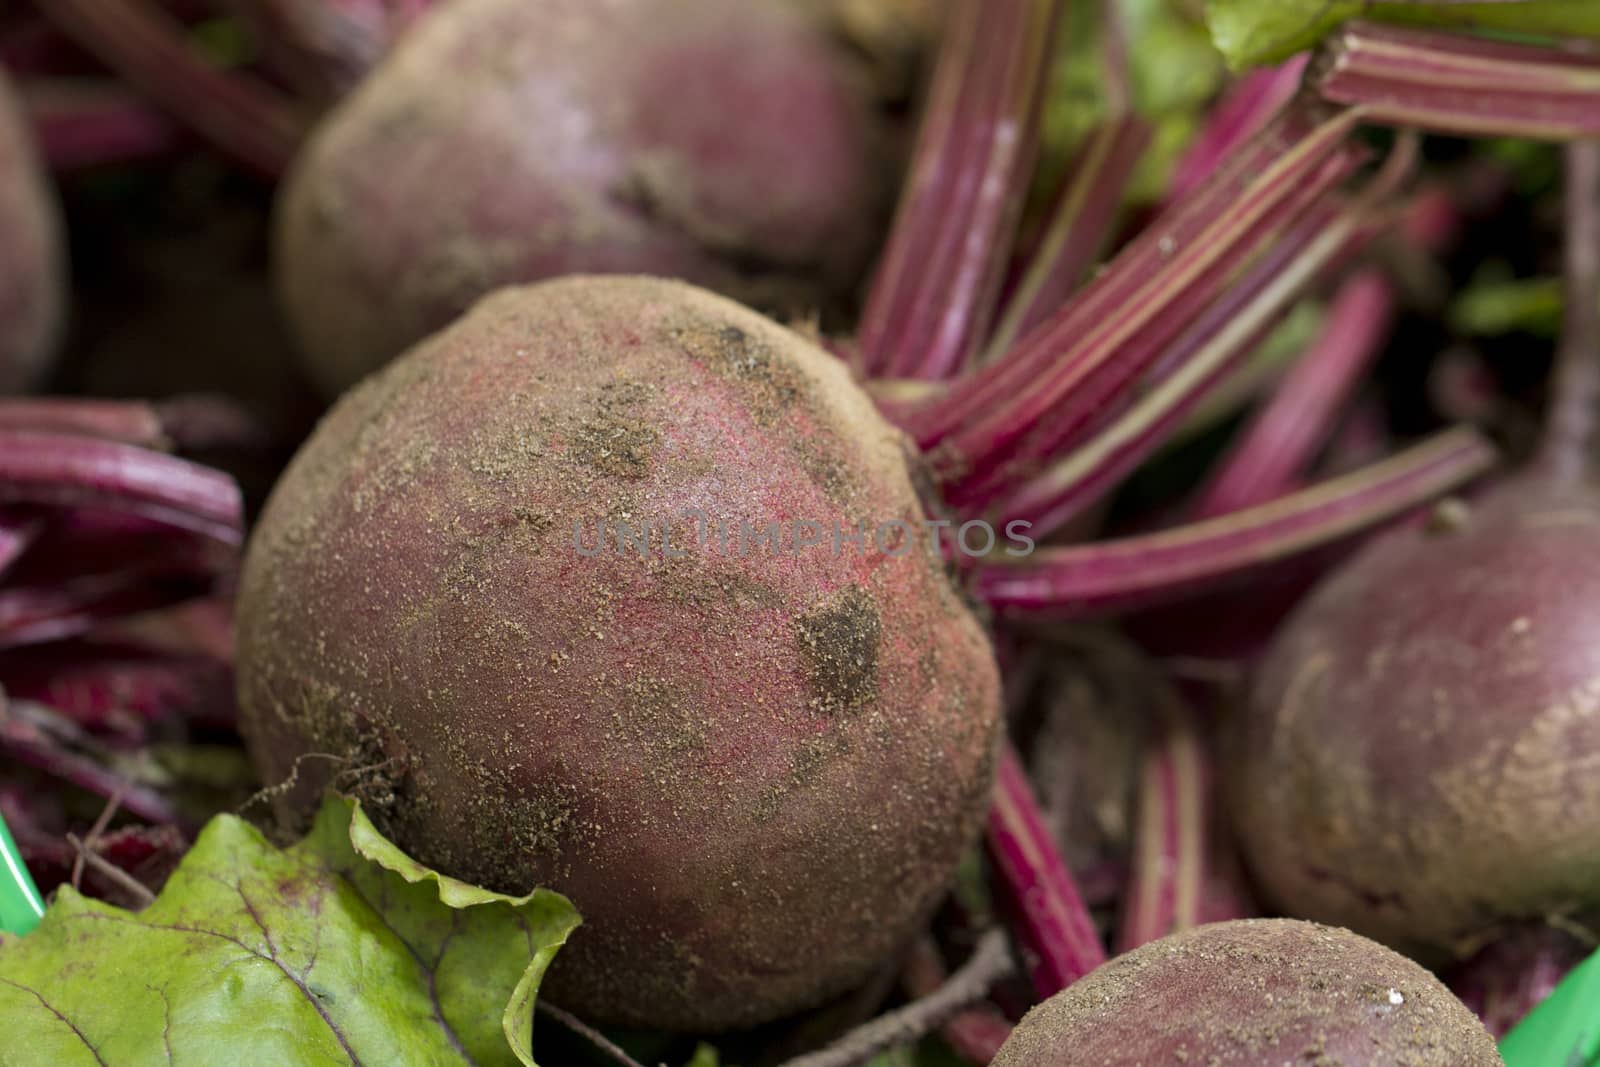 A close up image of freshly harvested, unwashed beetroot